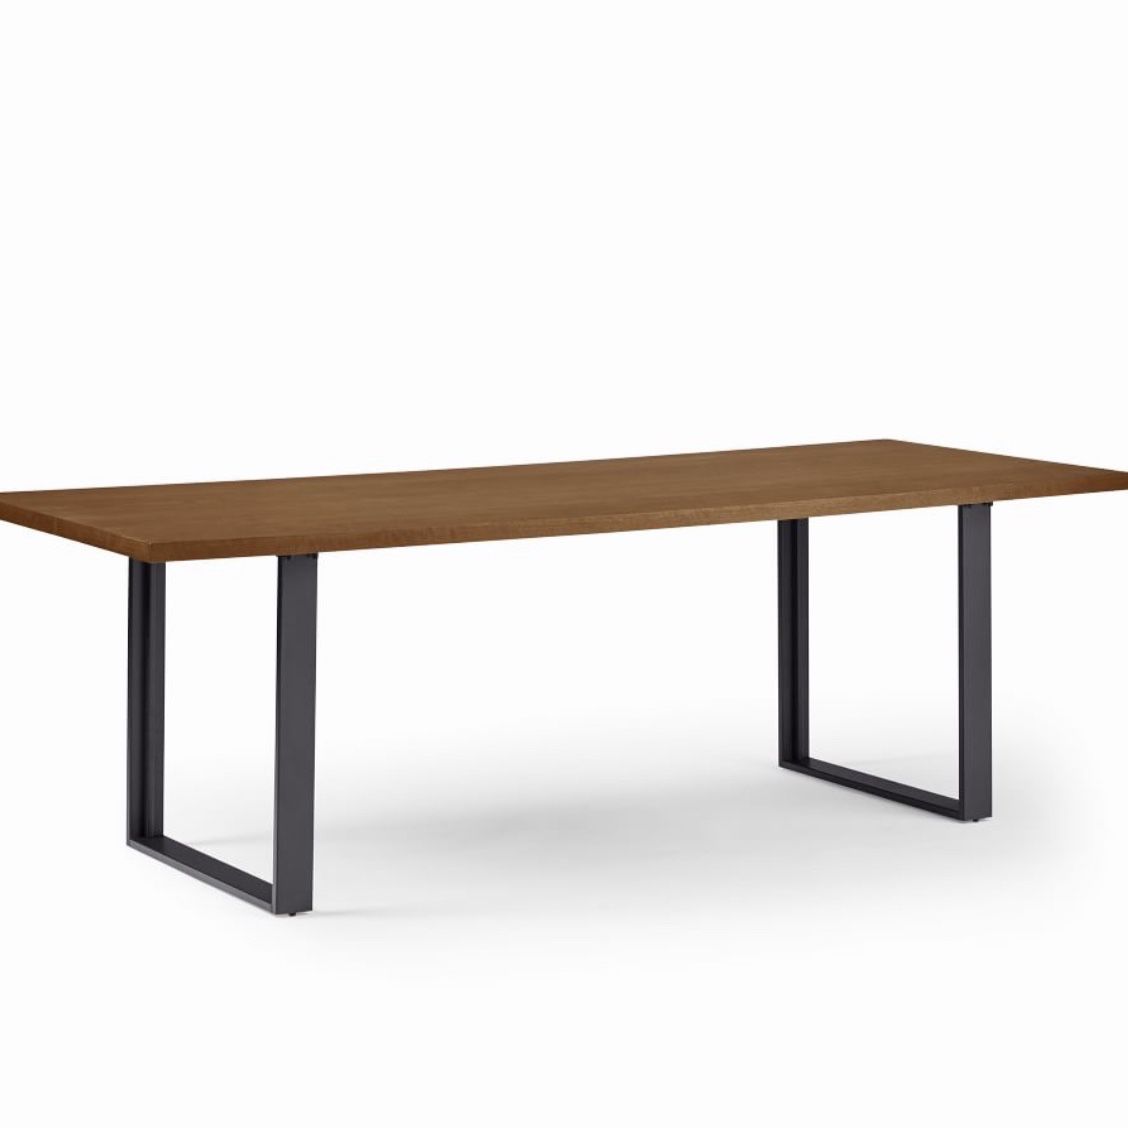 West Elm Tompkins Industrial Dining Table 94” Mint Condition - Cool Walnut Steel Legs